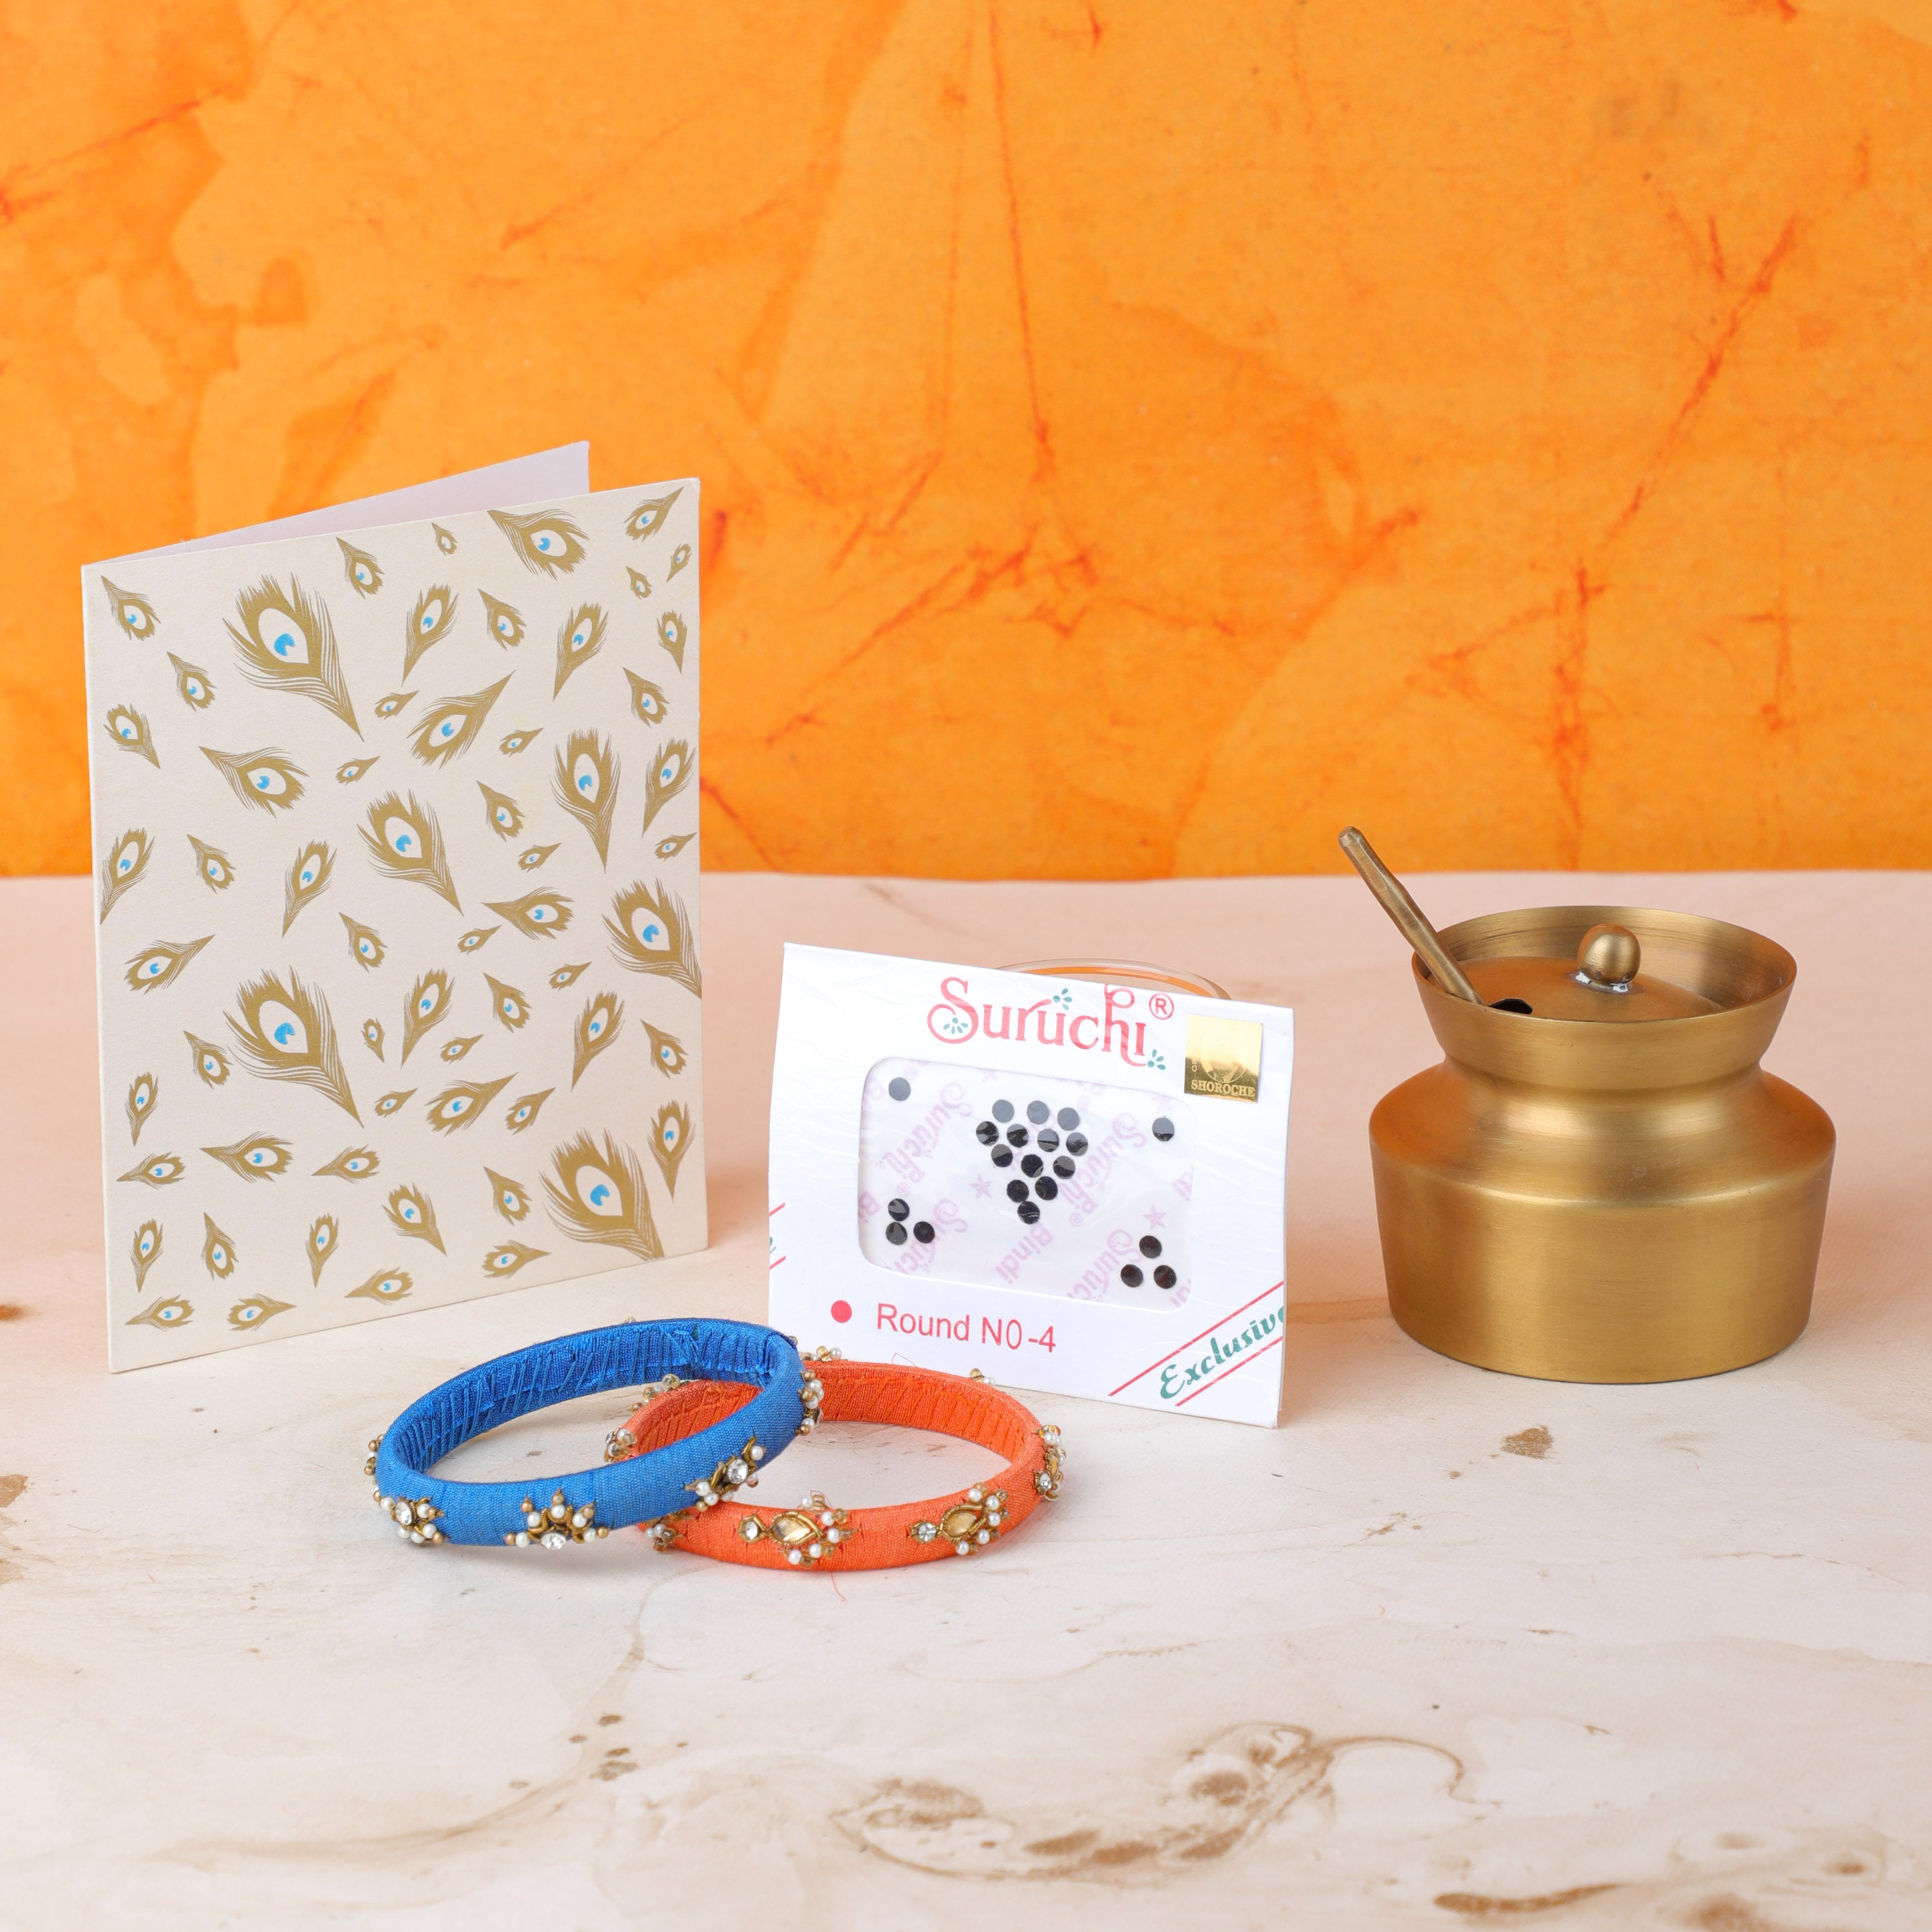 Unveiling Premium Rakhi Gifts for all kinds of Sisters!